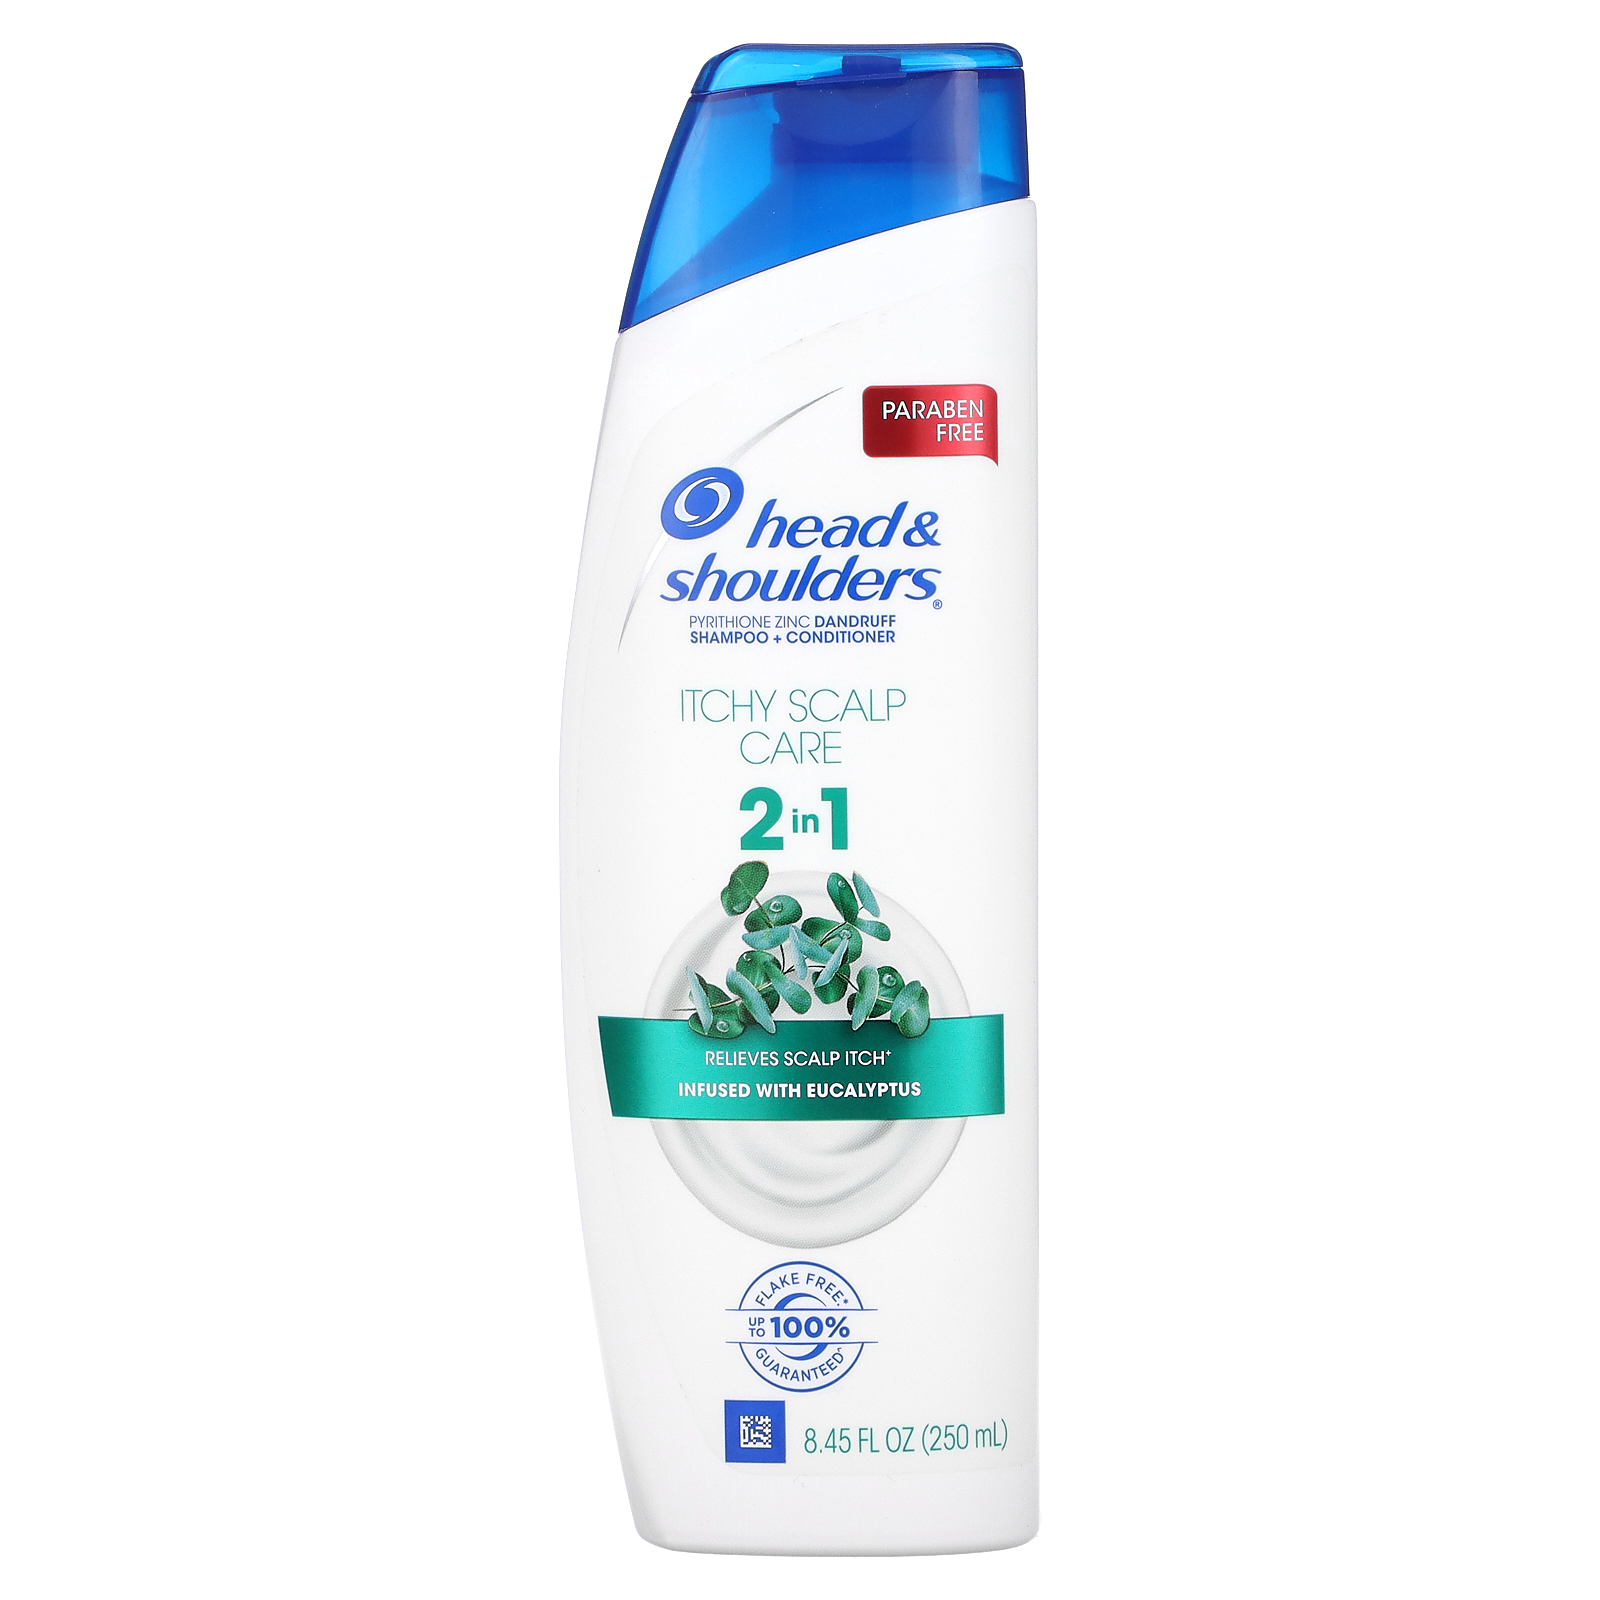 Head  Shoulders, Itchy Scalp Care, 2 in 1 Shampoo + Conditioner, Infused with Eucalyptus, 8.45 fl oz (250 ml)